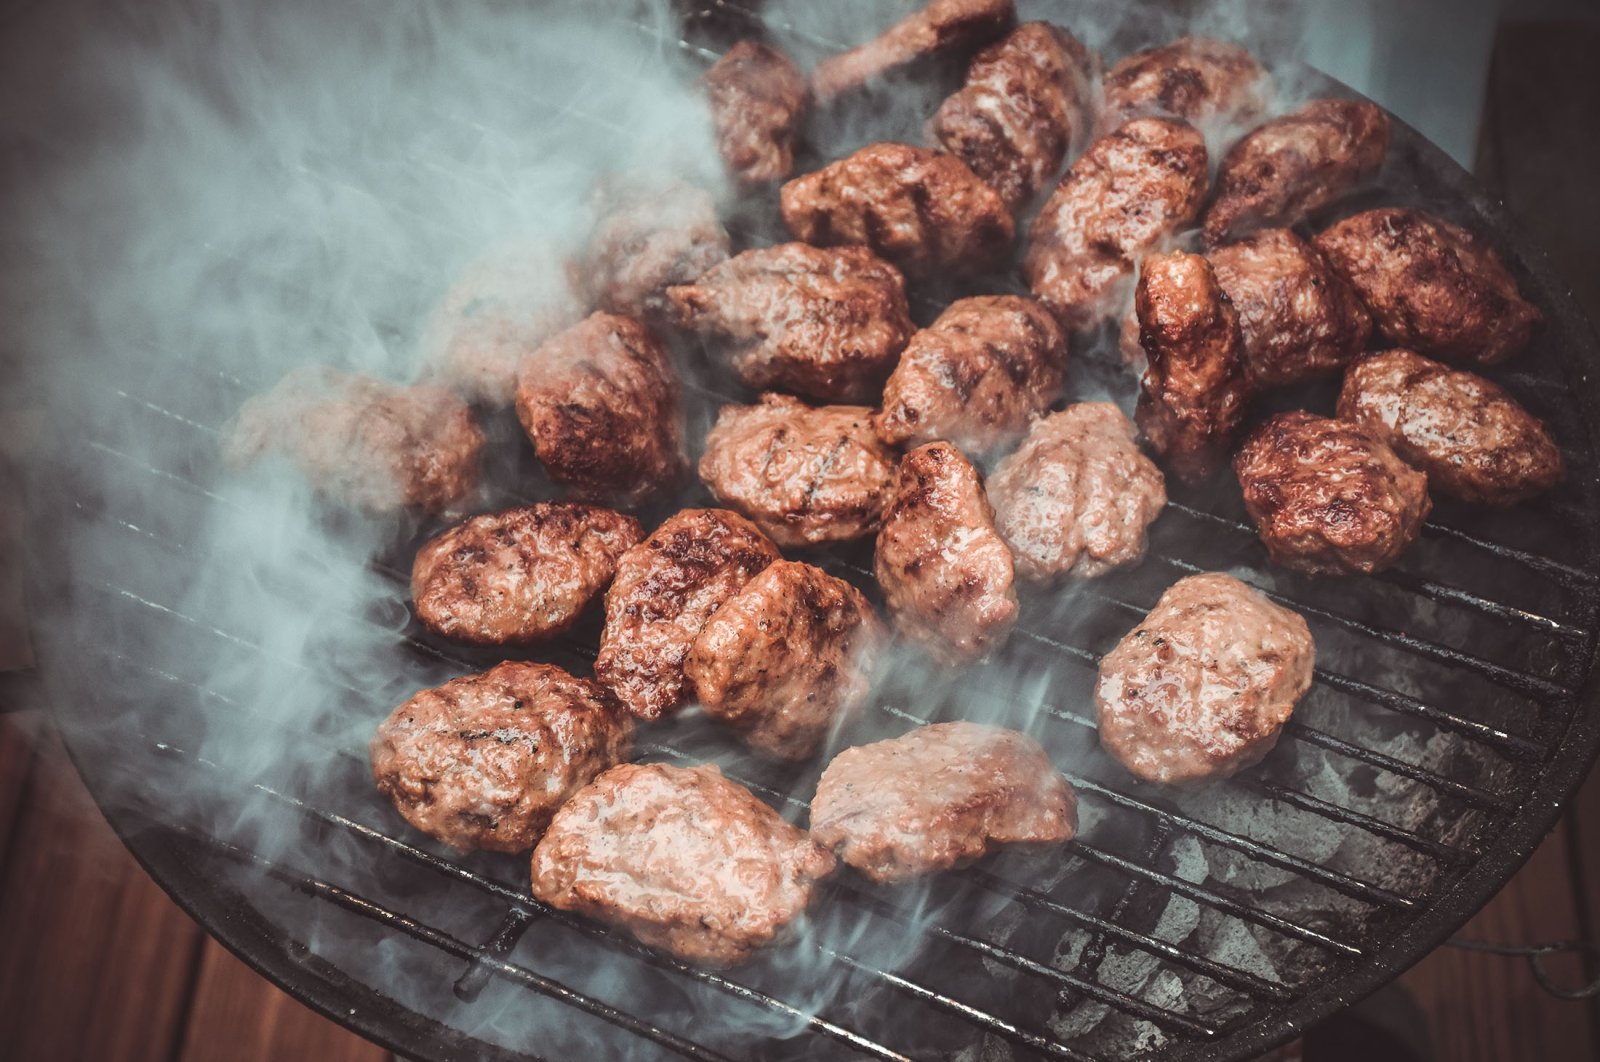 When it comes to meat, Turks almost always favor a barbecue. (Shutterstock Photo)